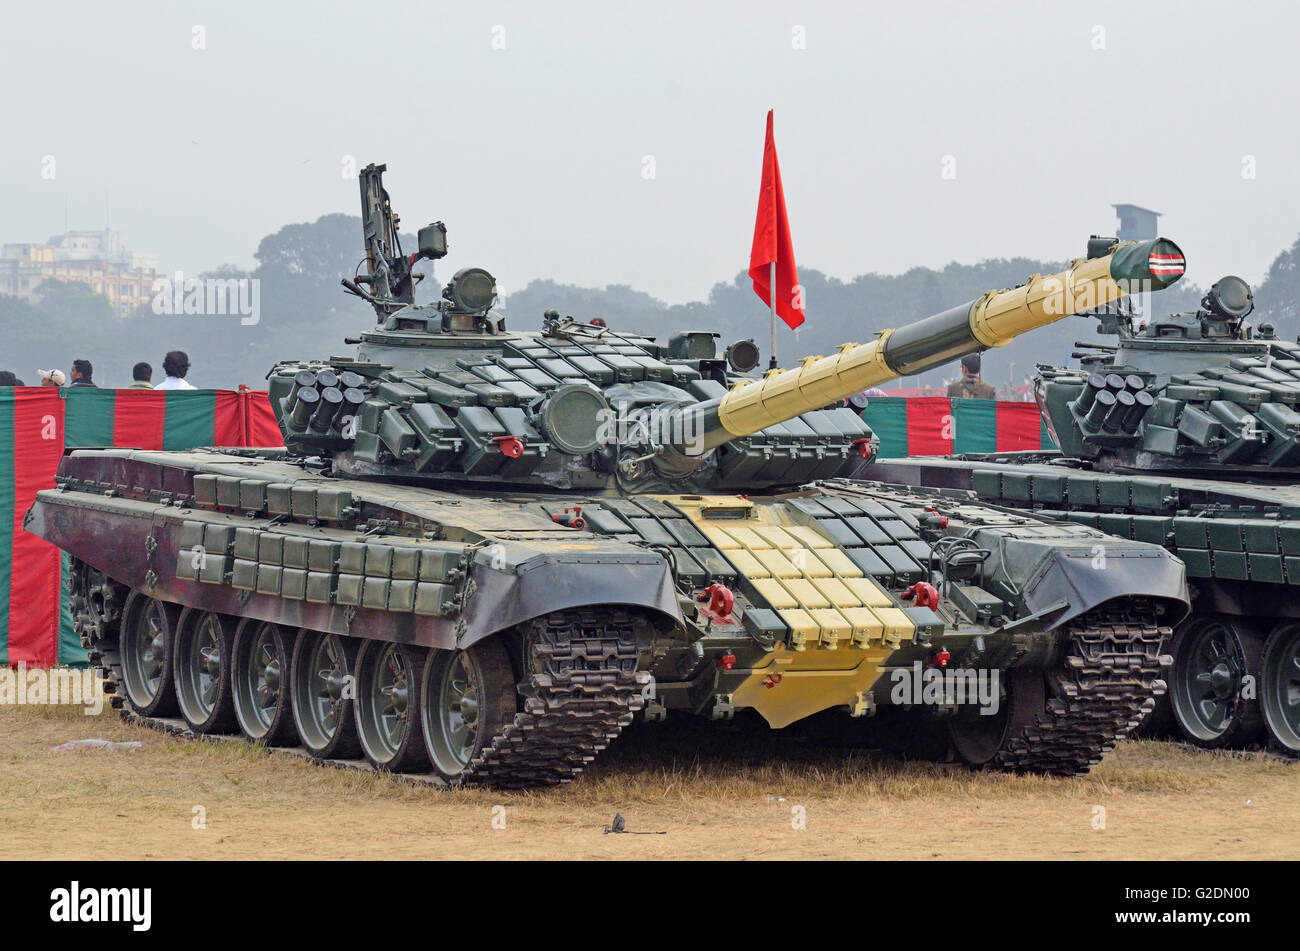 T 72m Main Battle Tanks Of The Indian Army Kolkata West Bengal Stock Photo Alamy